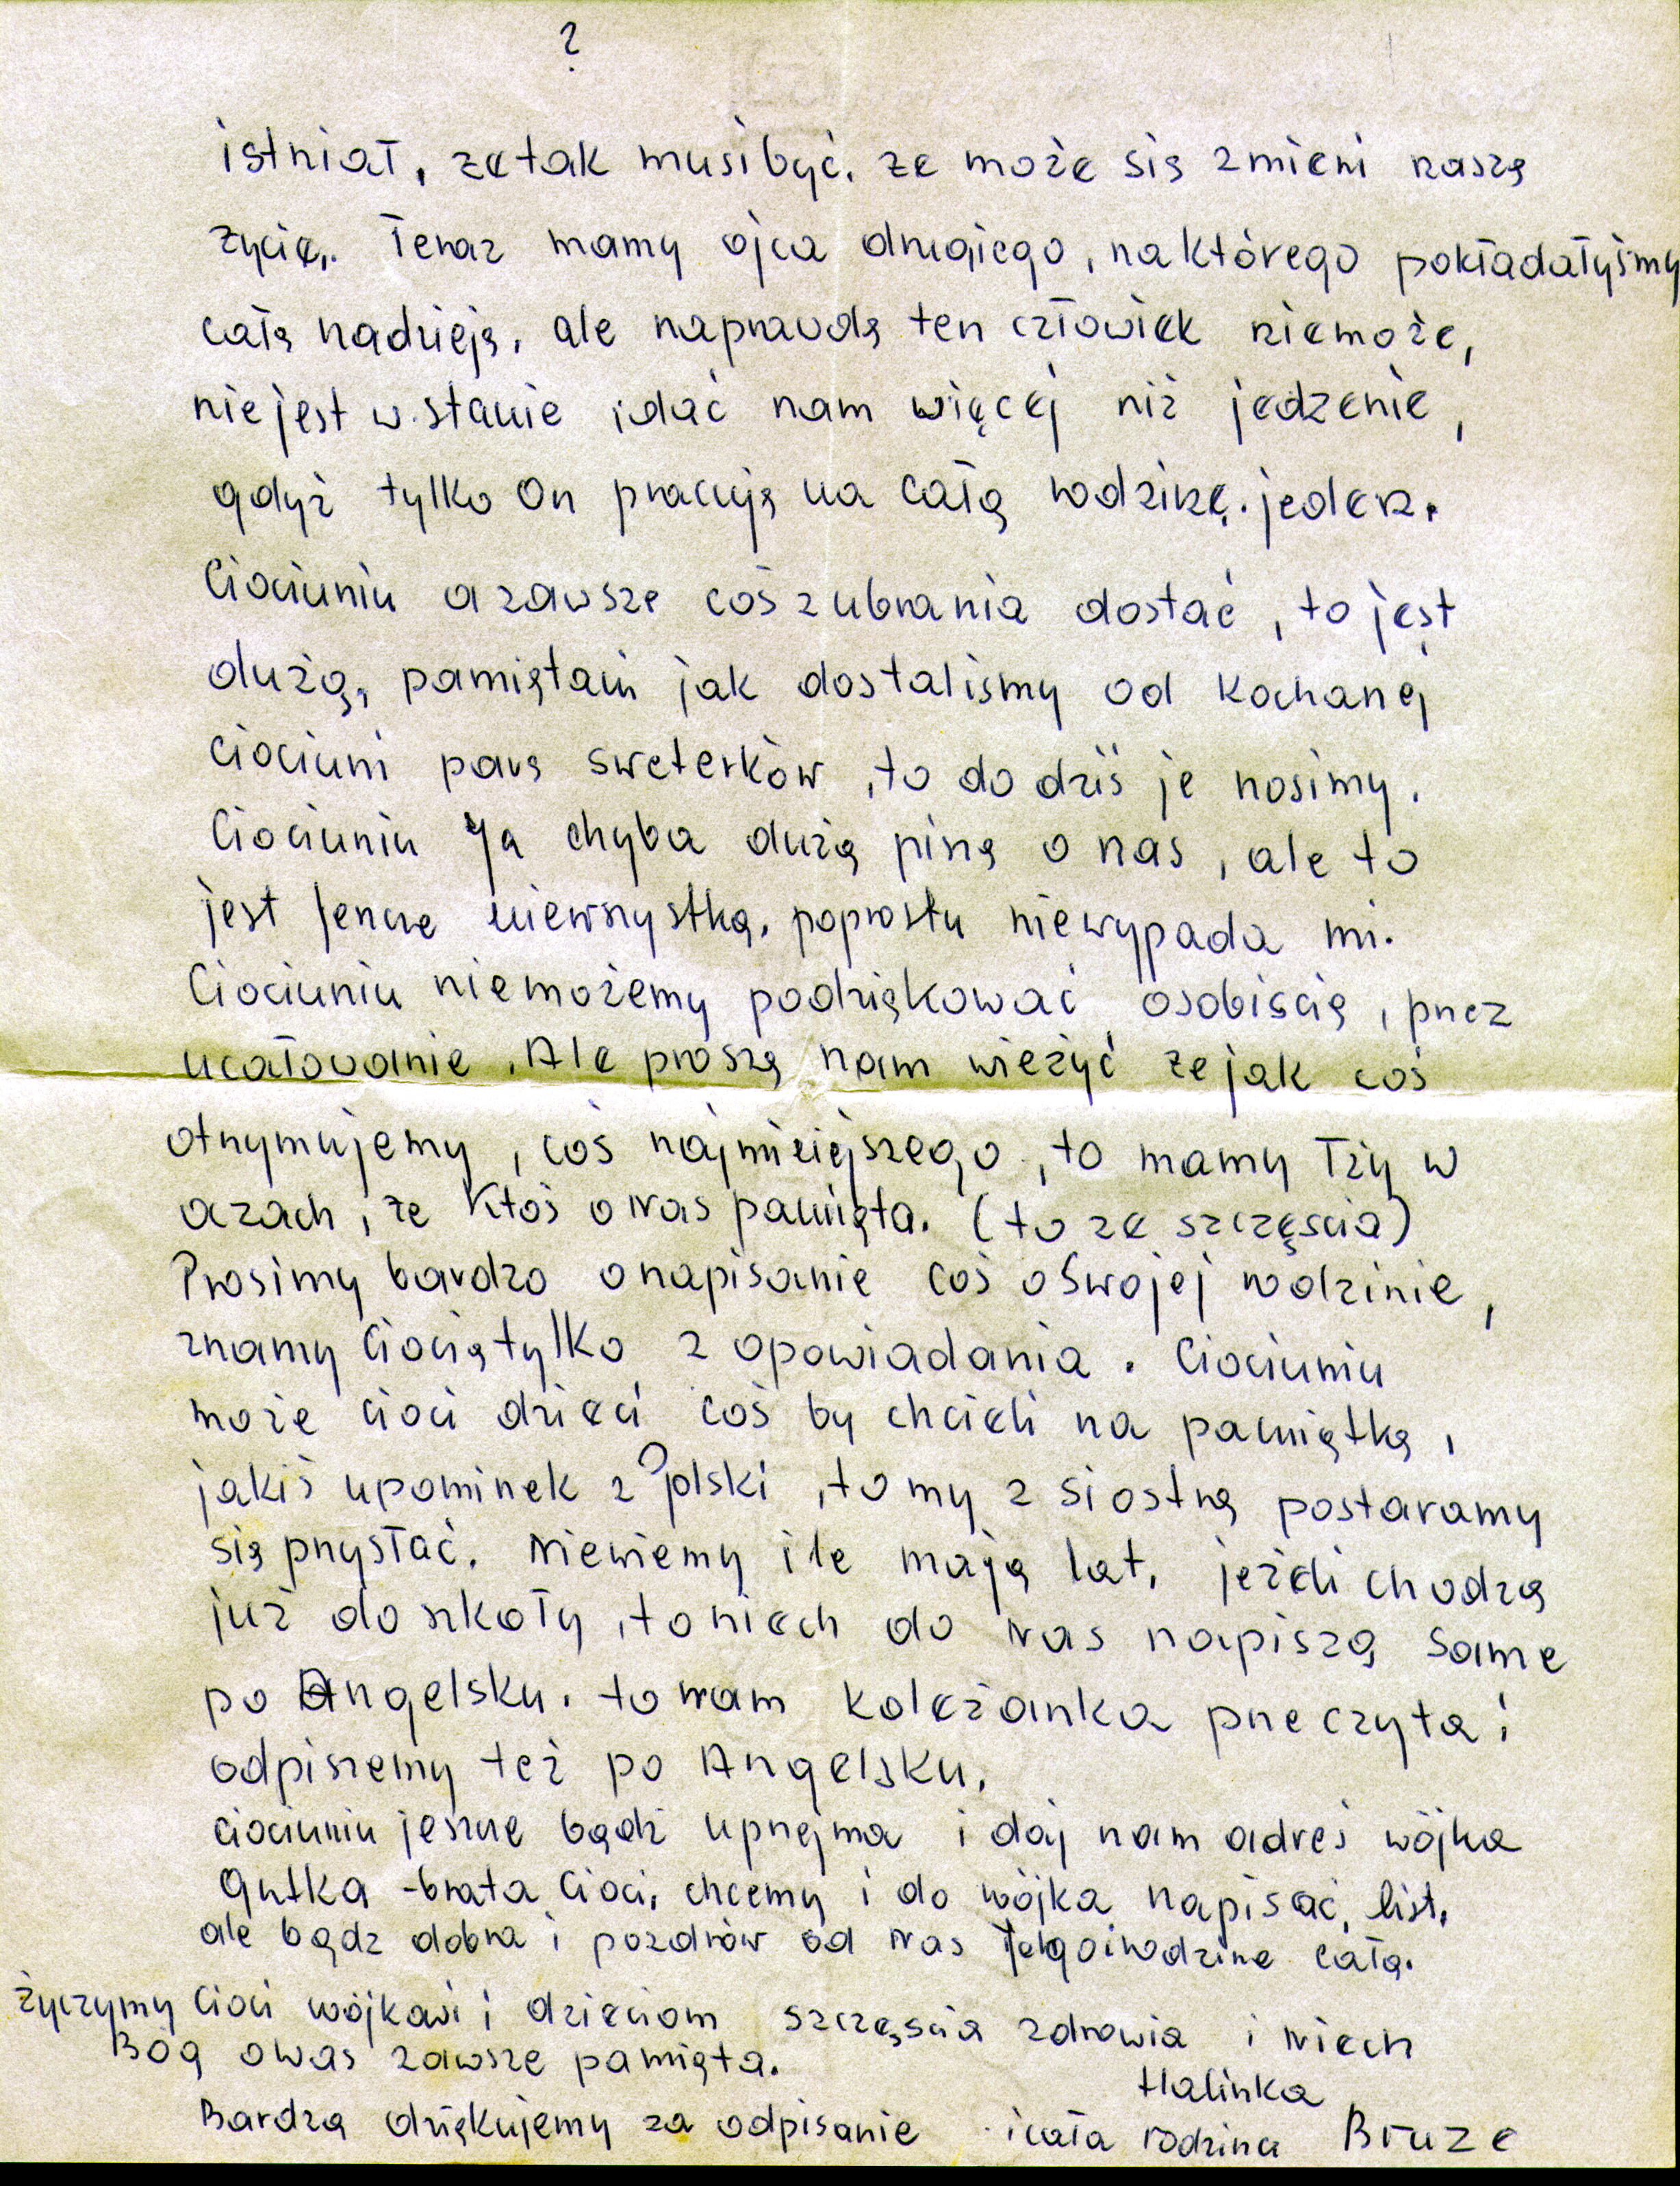 Julia Bruze - Letter from Poland _page 2_ 1963.jpg